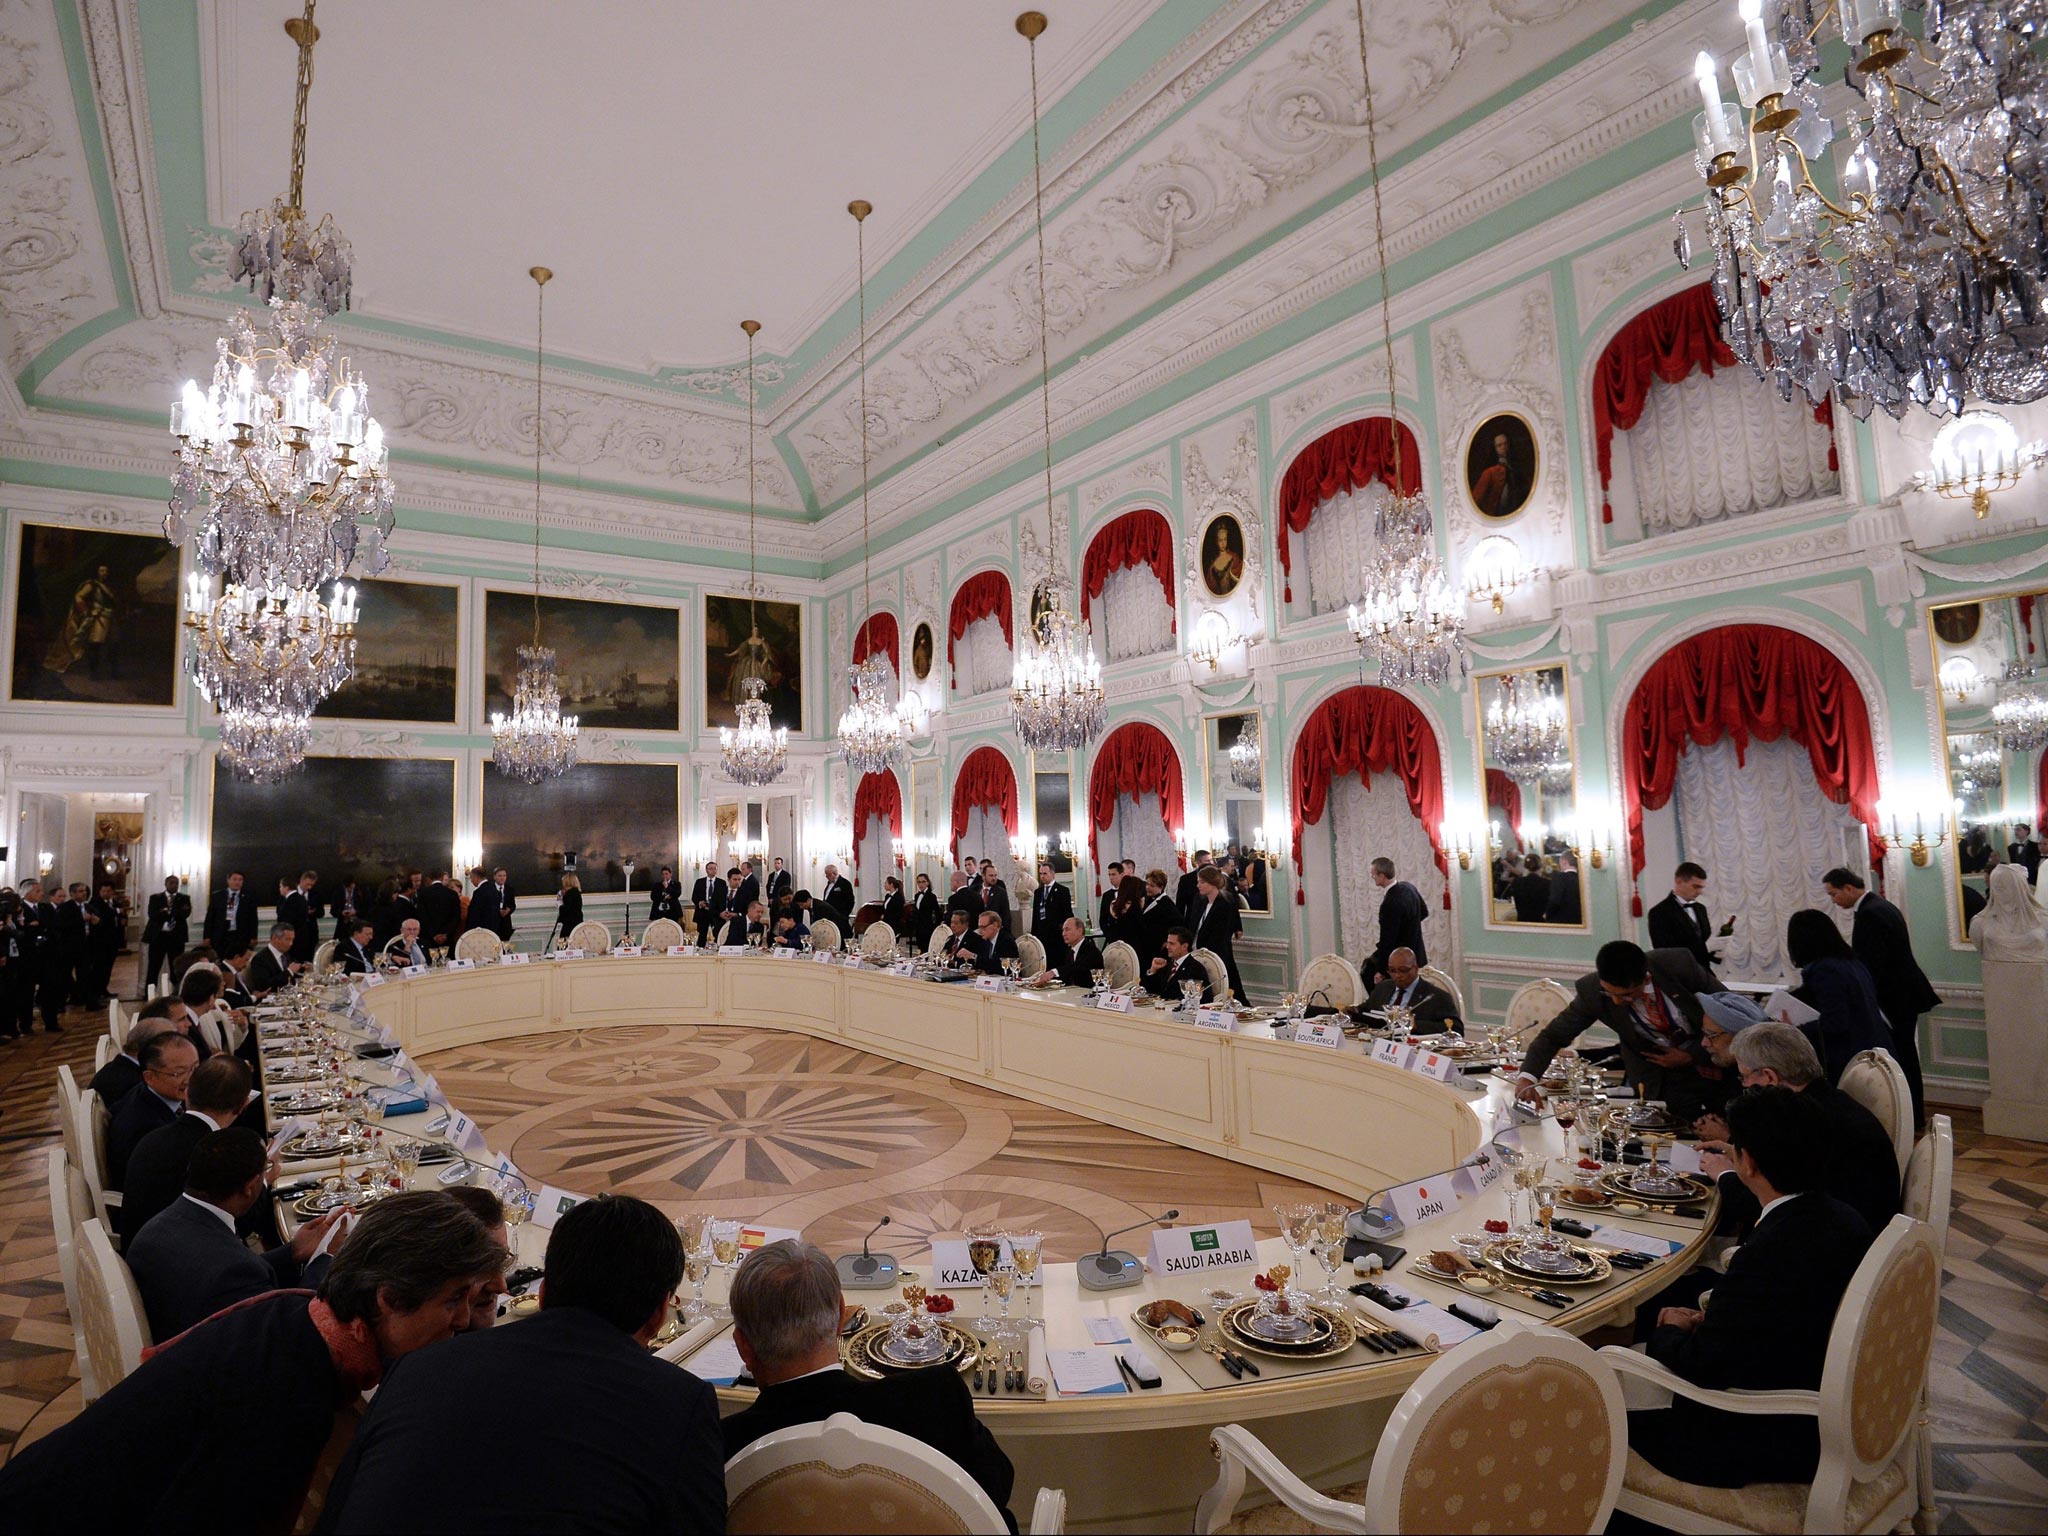 Twenty leaders attend a working dinner after the first session of the G20 Summit in St. Petersburg, Russia